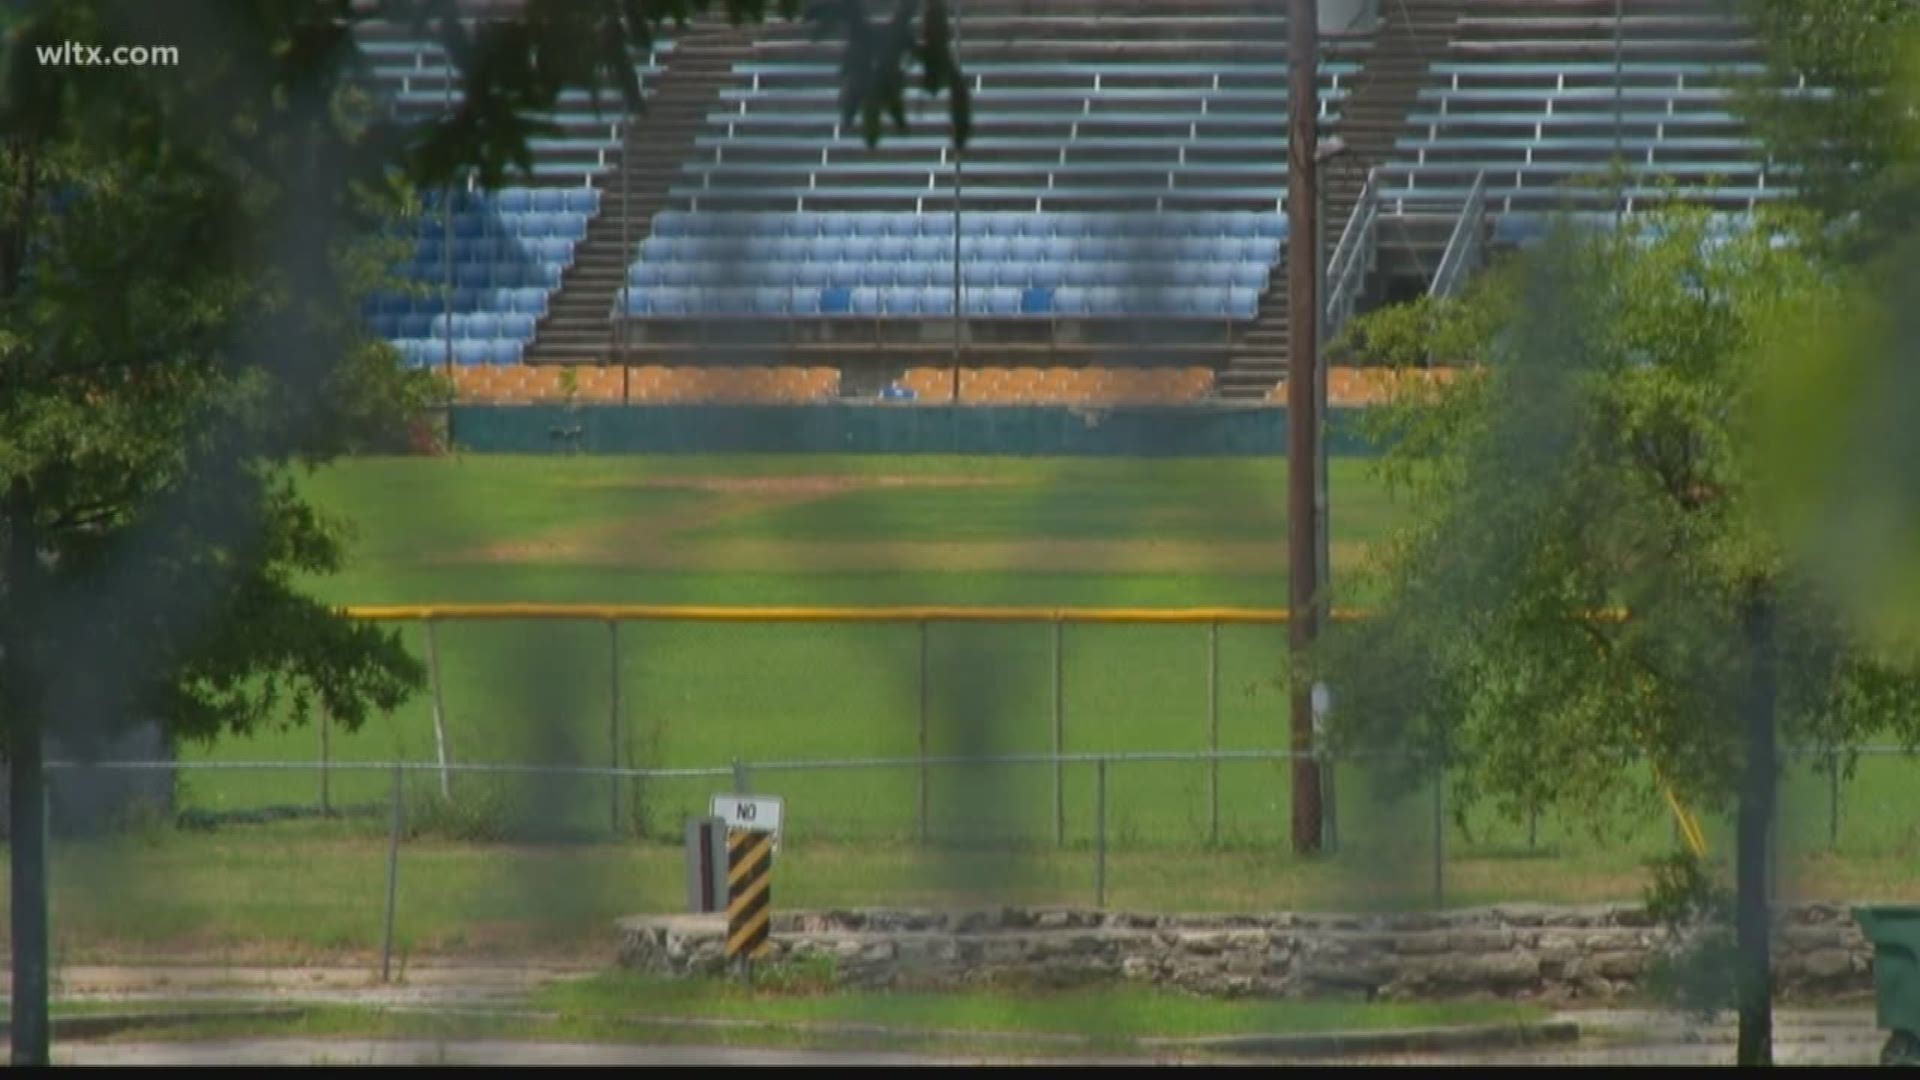 The City of Columbia is finalizing the sale of Capital City Stadium site to a developer for over 1.6 million dollars.